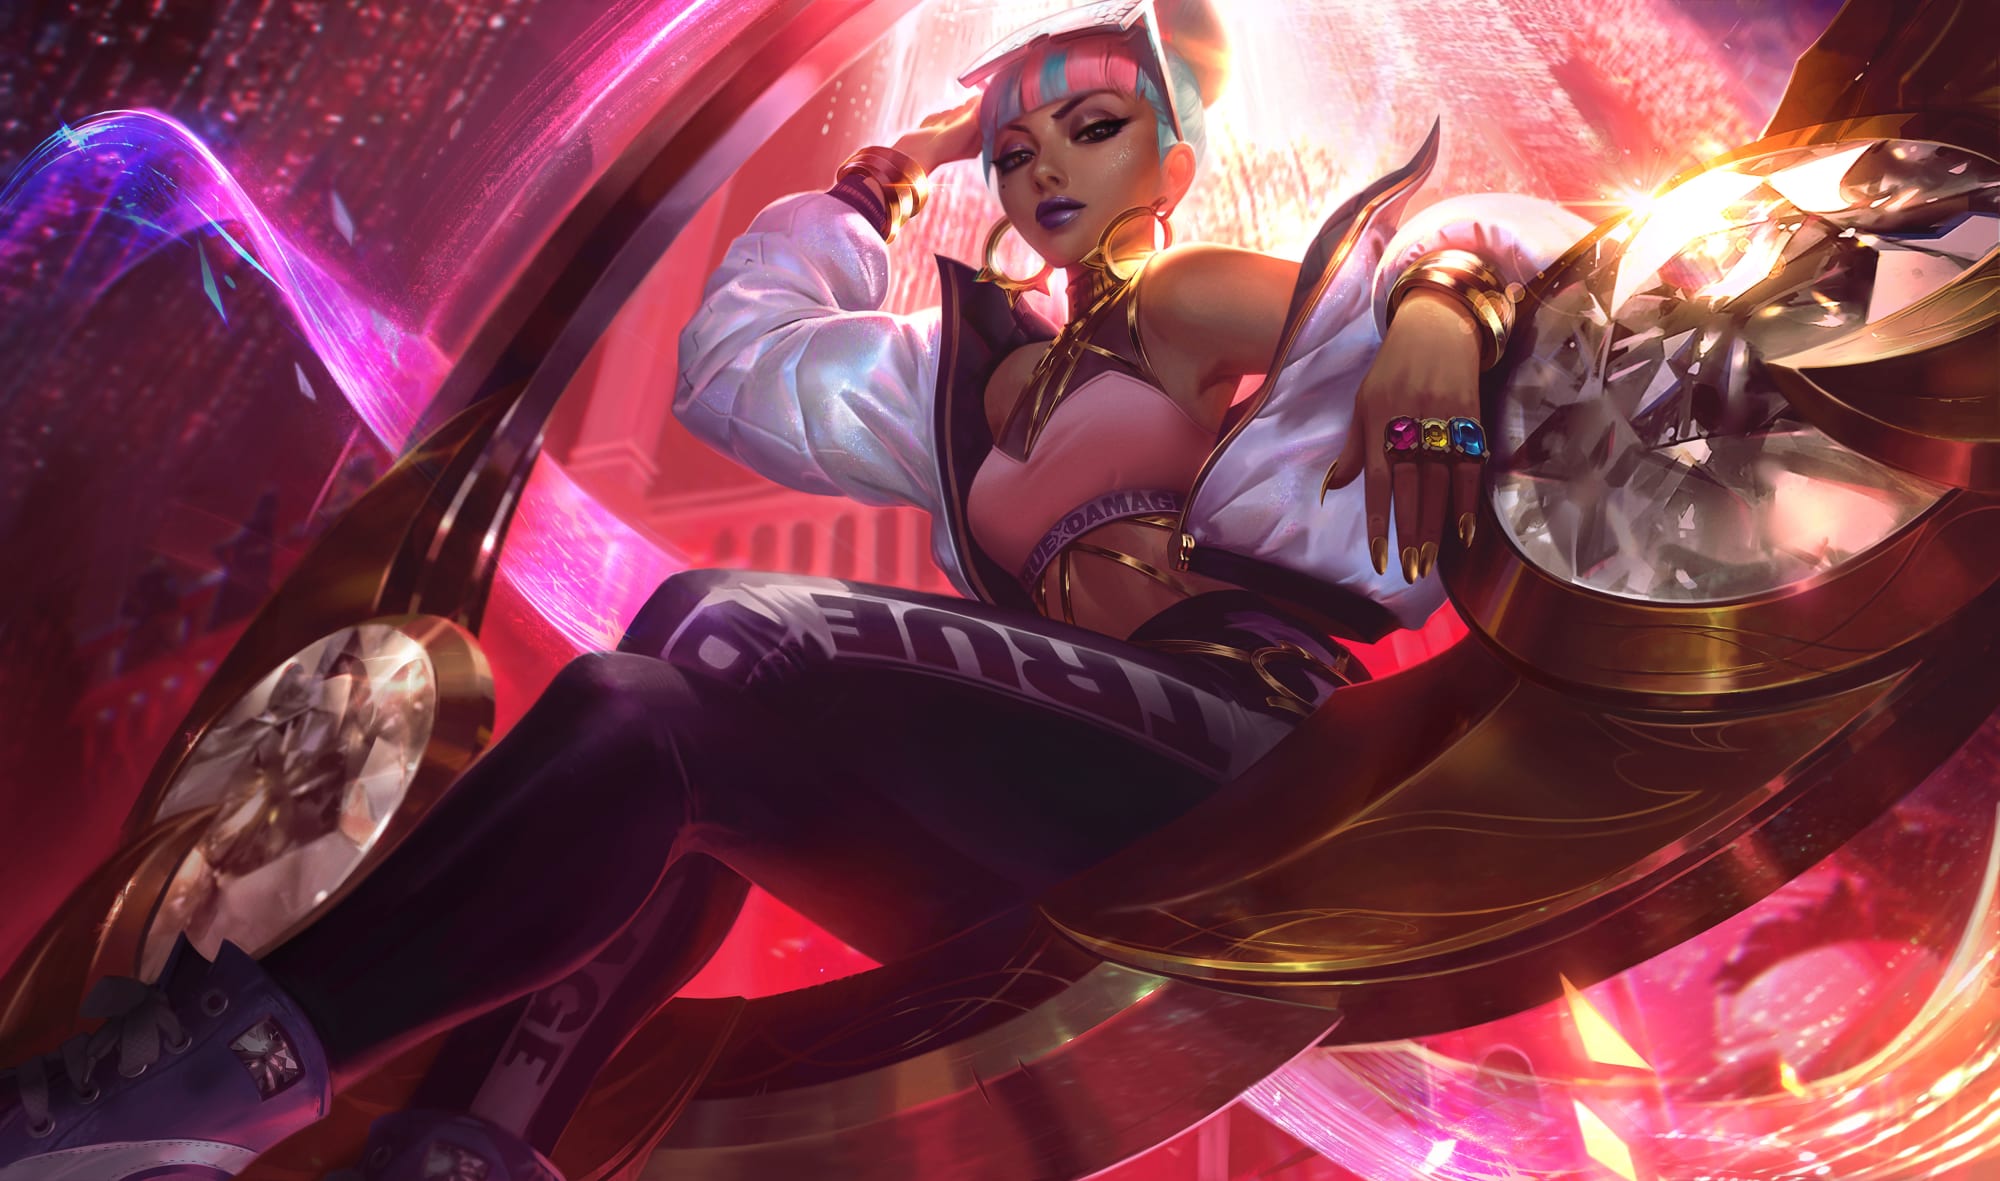 Louis Vuitton is designing new skins for League of Legends - The Verge